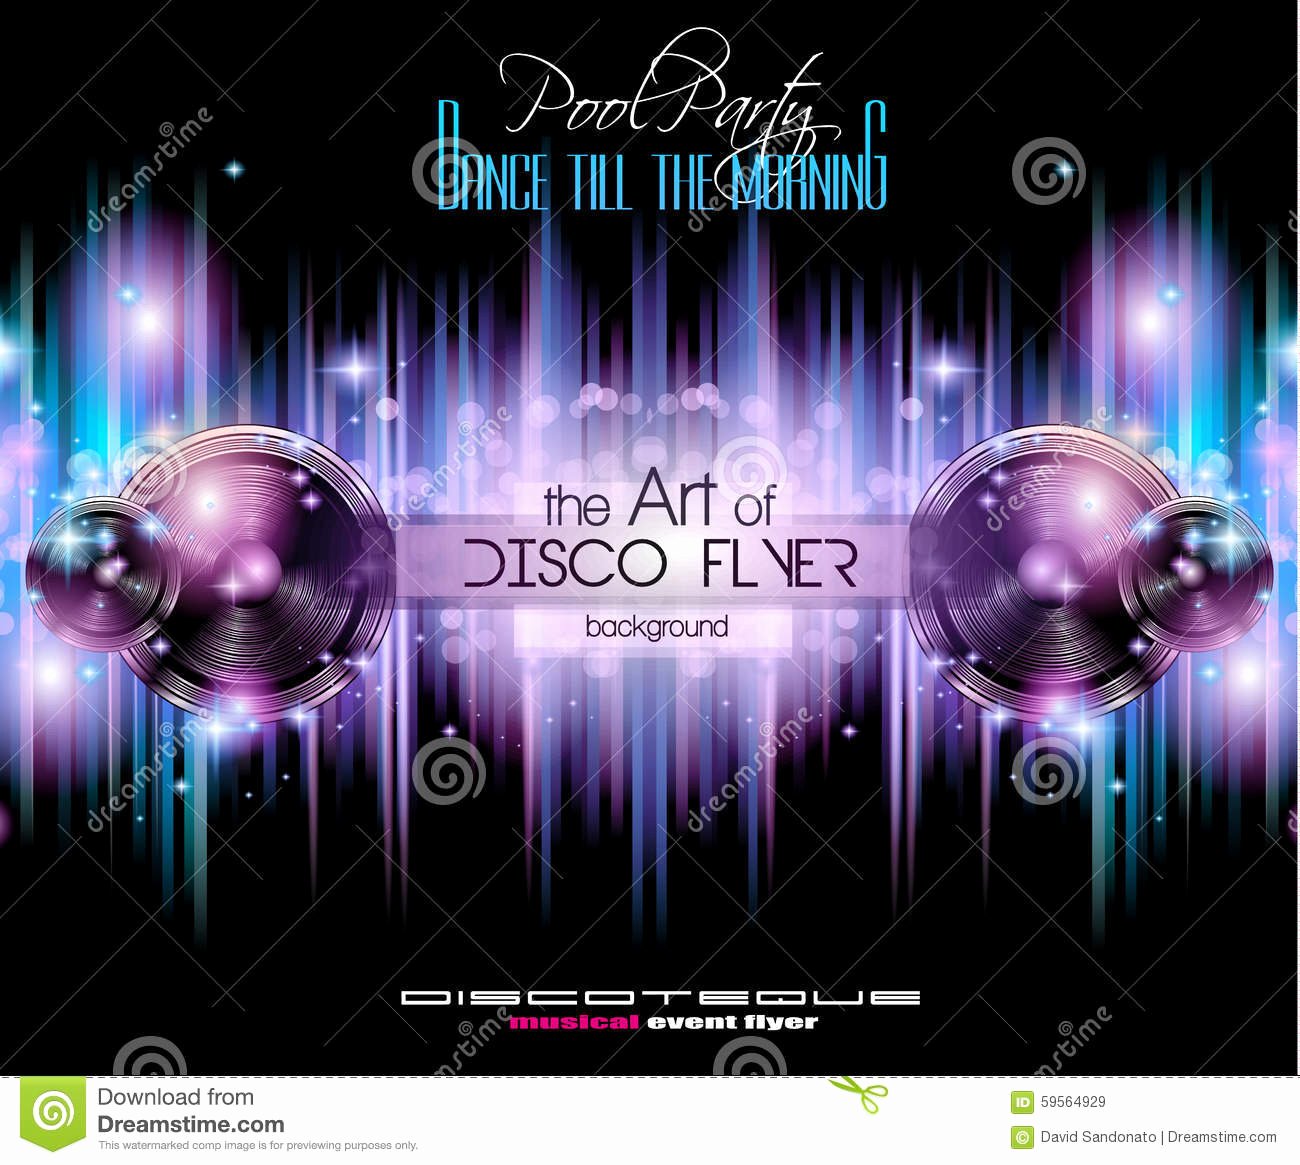 Disco Club Flyer Template for Your Music Nights event